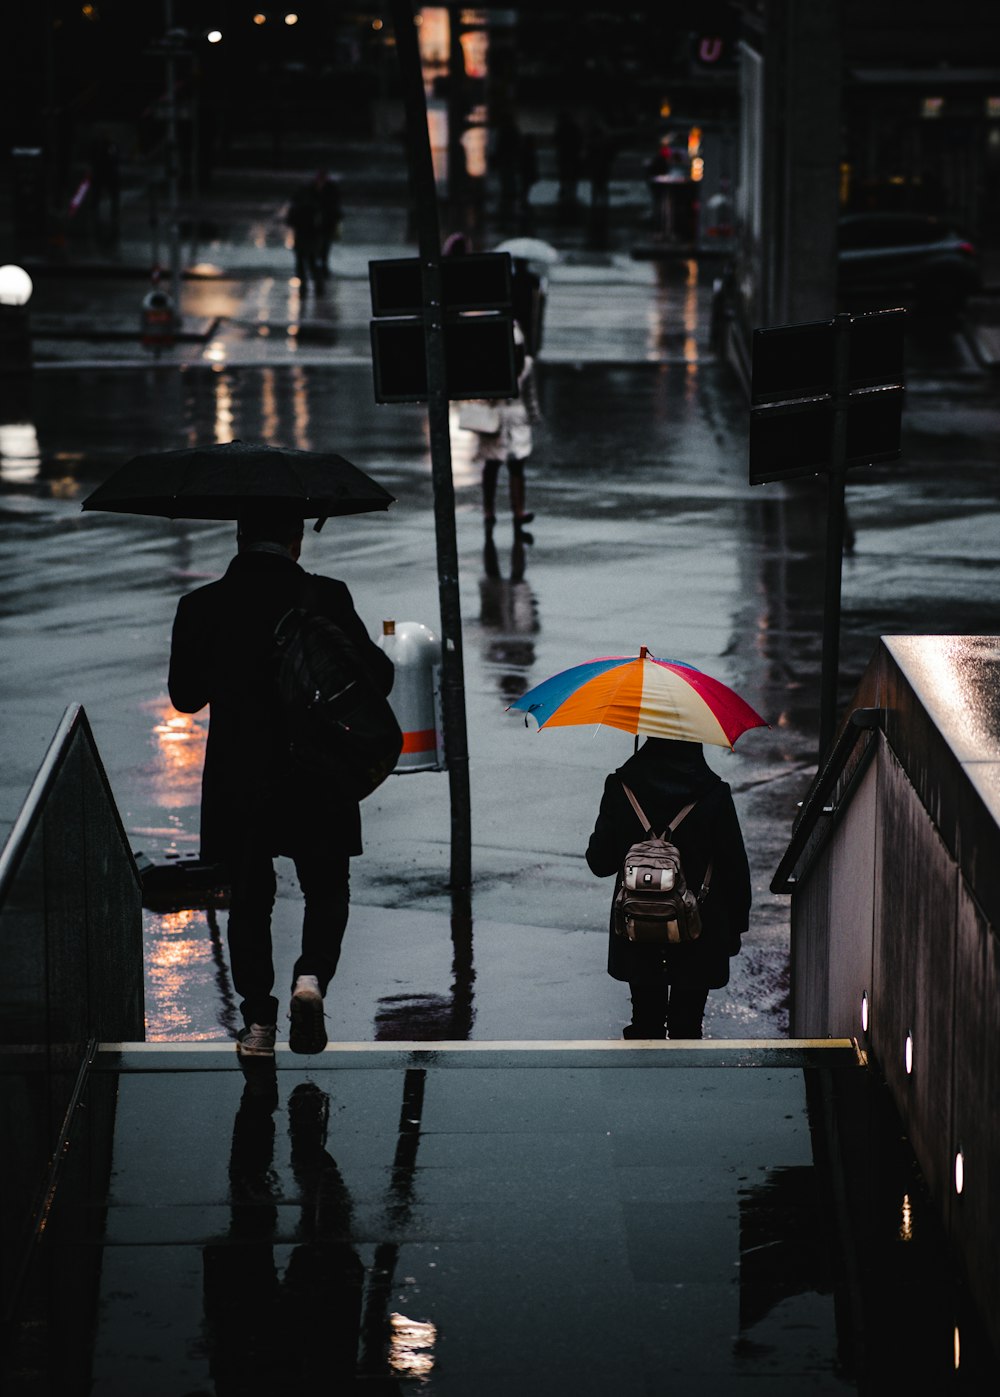 person in black coat holding umbrella standing on sidewalk during night time